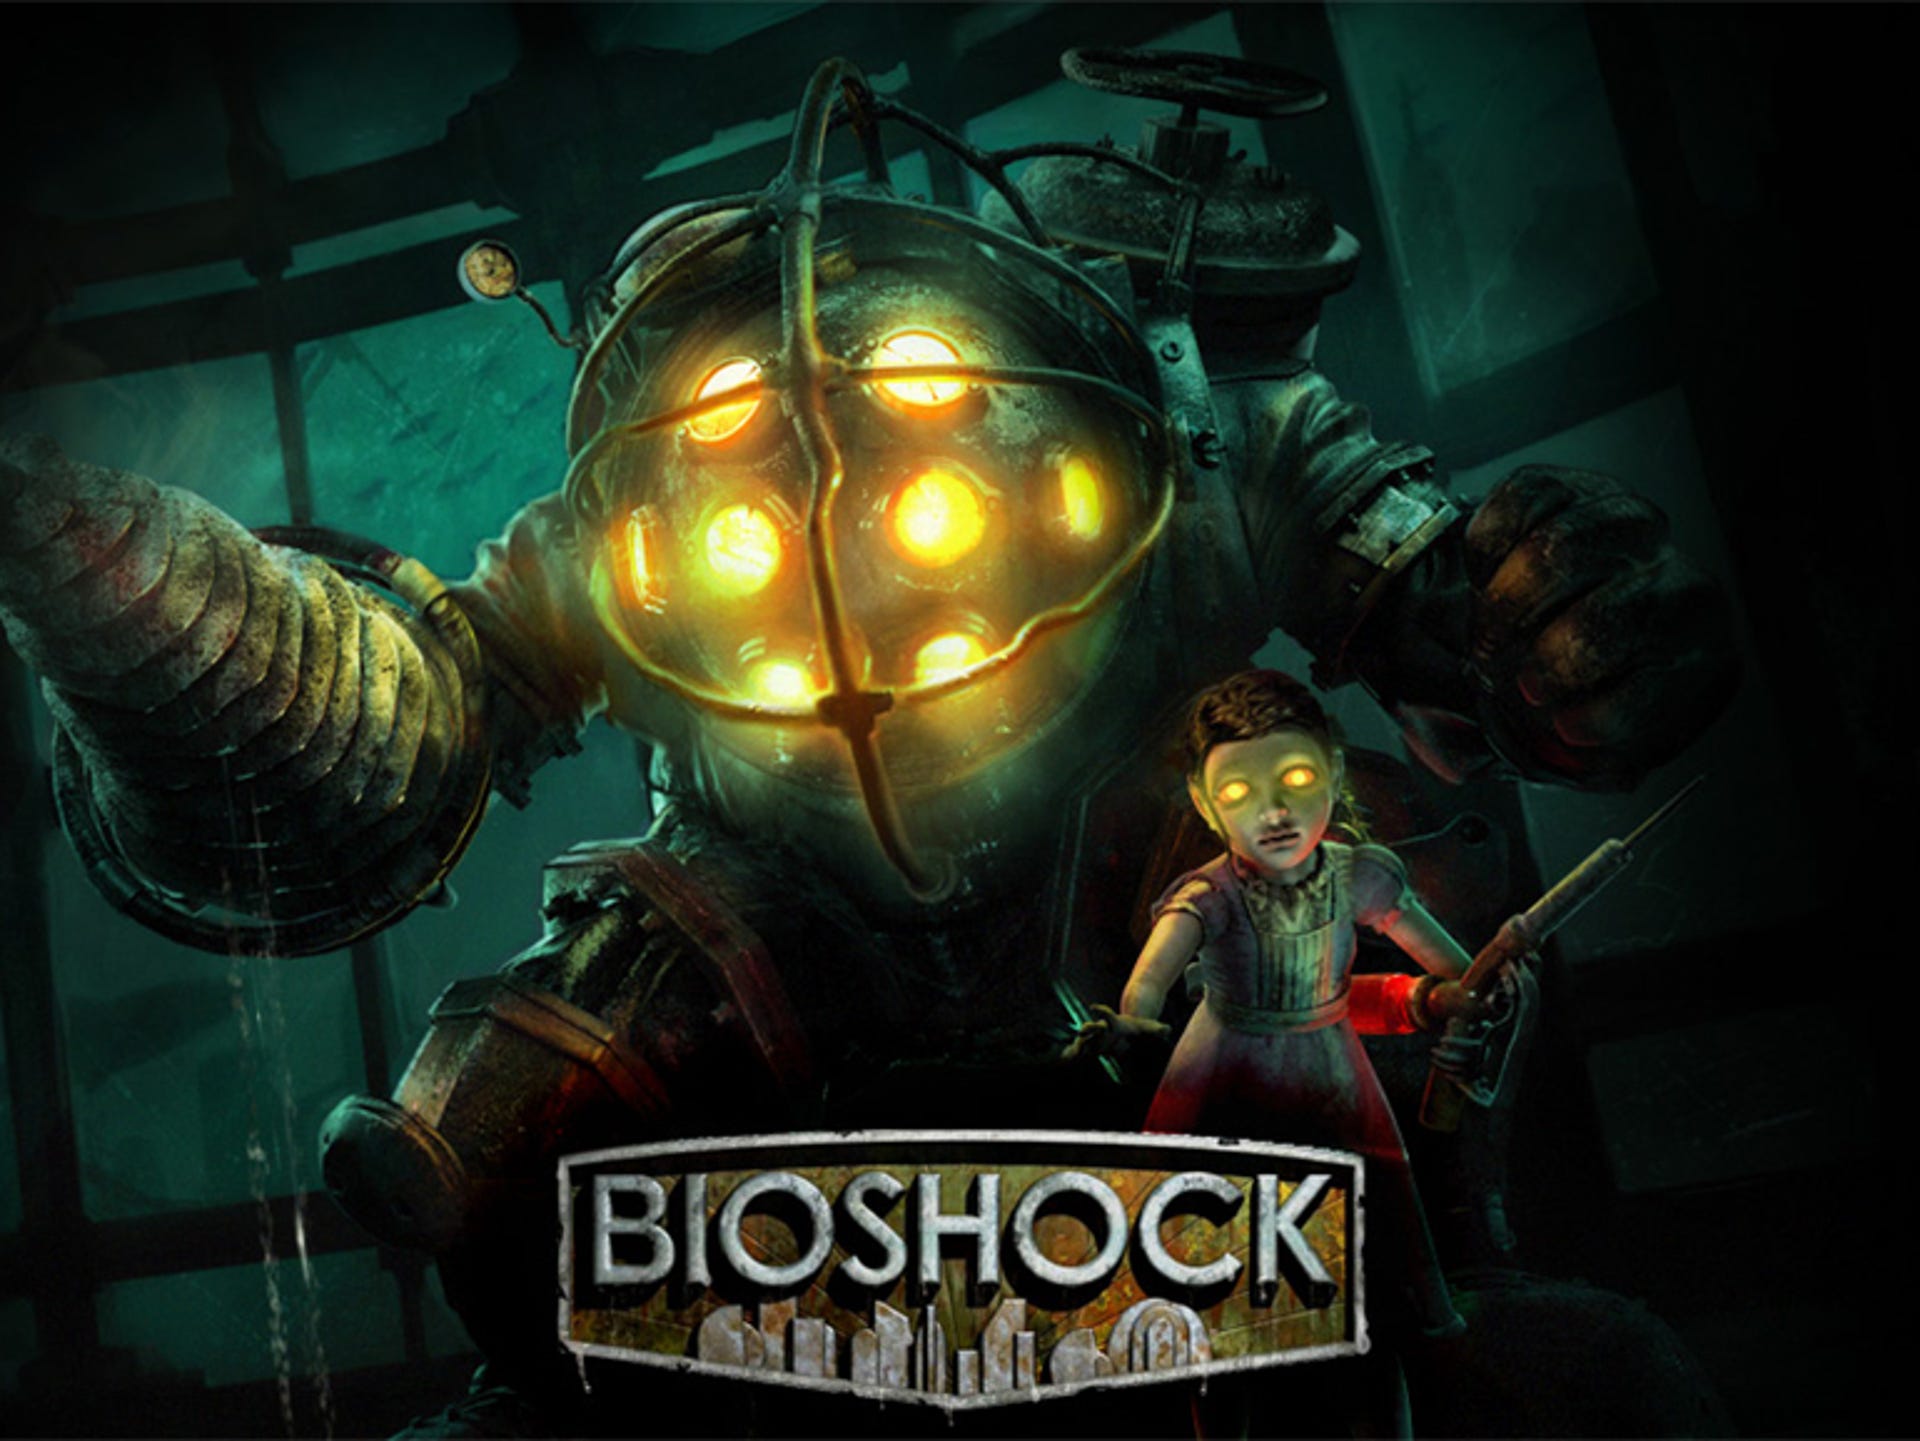 BioShock: The Collection - Sony Playstation 4 - PS4 - Bioshock 1, 2, &  Infinite